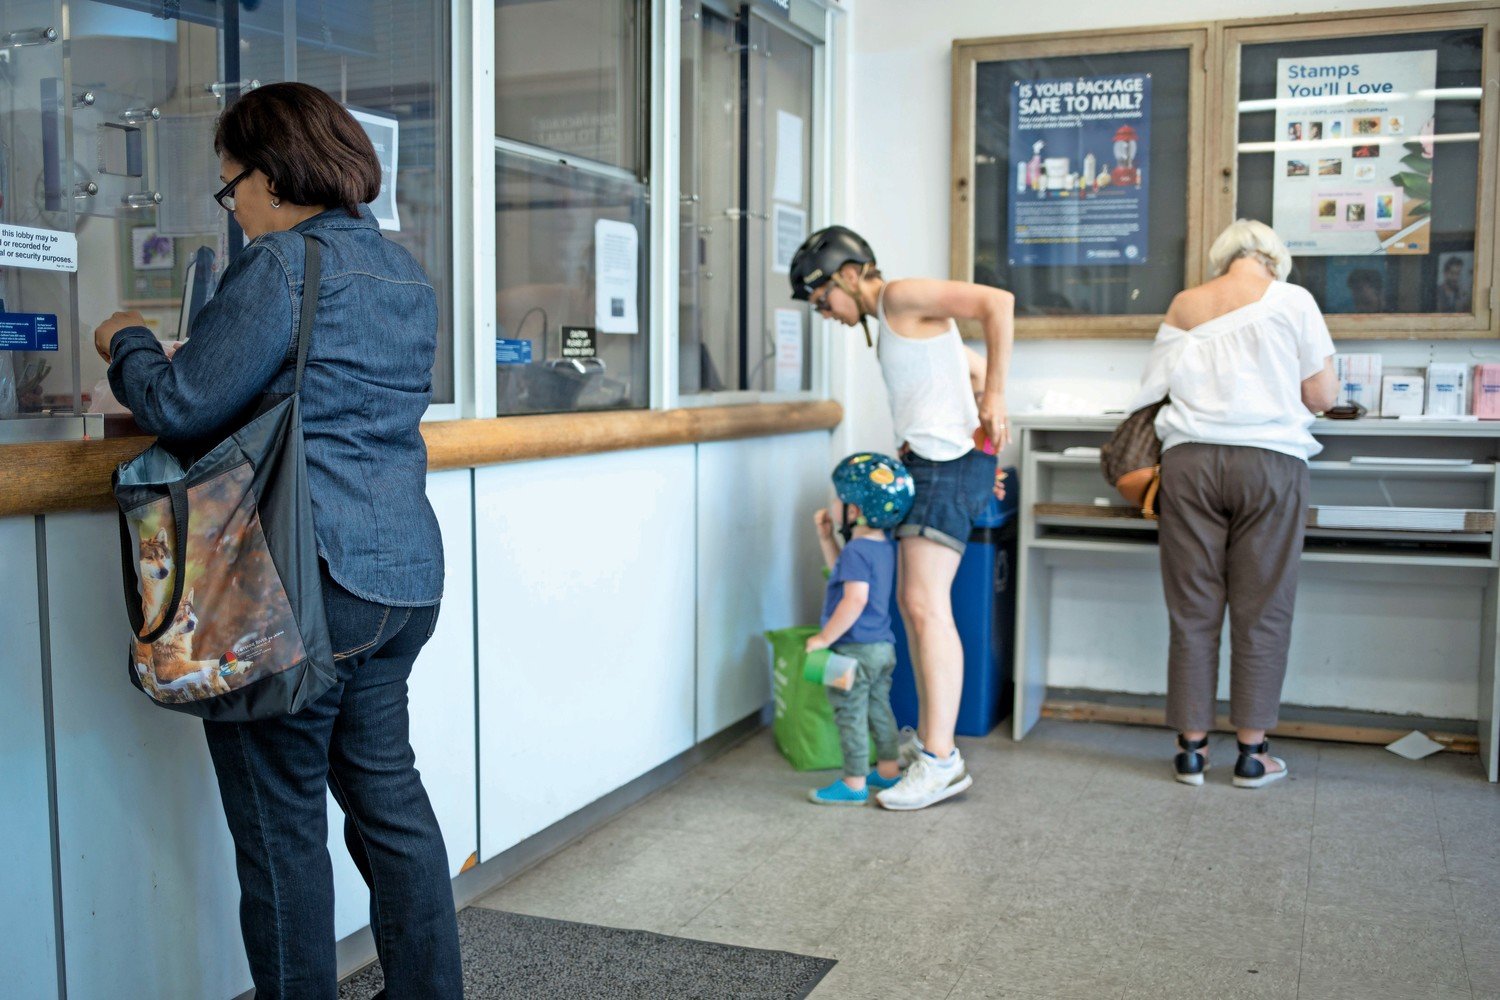 Customers take care of their postal needs at the post office on West 238th Street in Summer 2018. More recently, customers have complained about not receiving mail, primarily because this particular location is shut down because of the coronavirus pandemic.